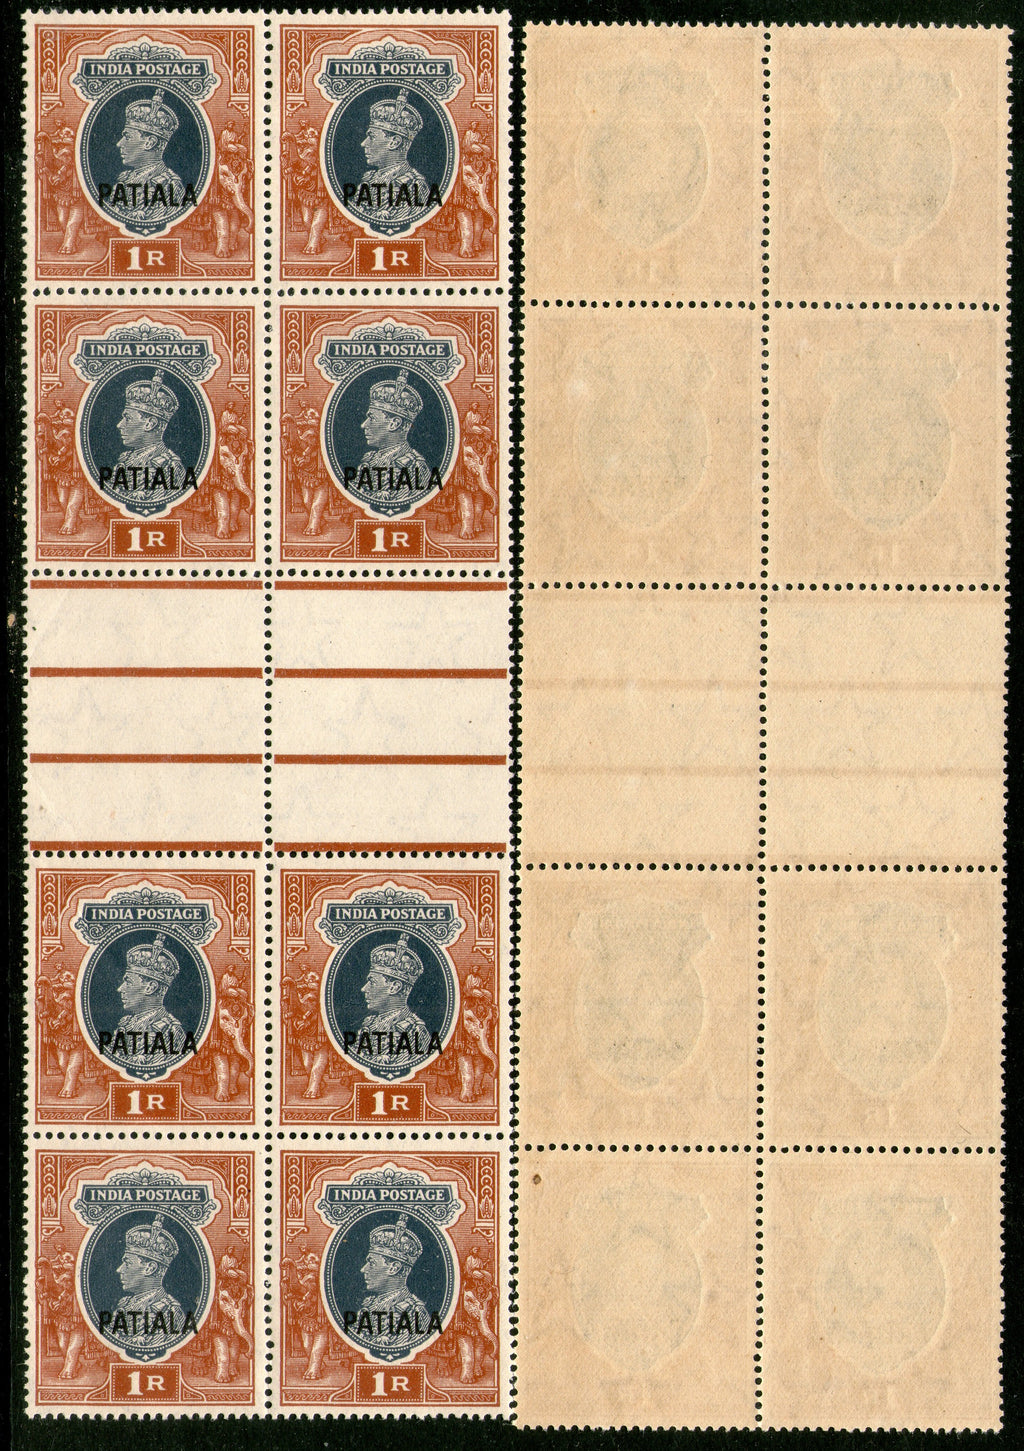 India Patiala State 1Re KG VI Postage Stamp SG 102 / Sc 115 Vertical Gutter Pair  BLK/4 MNH - Phil India Stamps